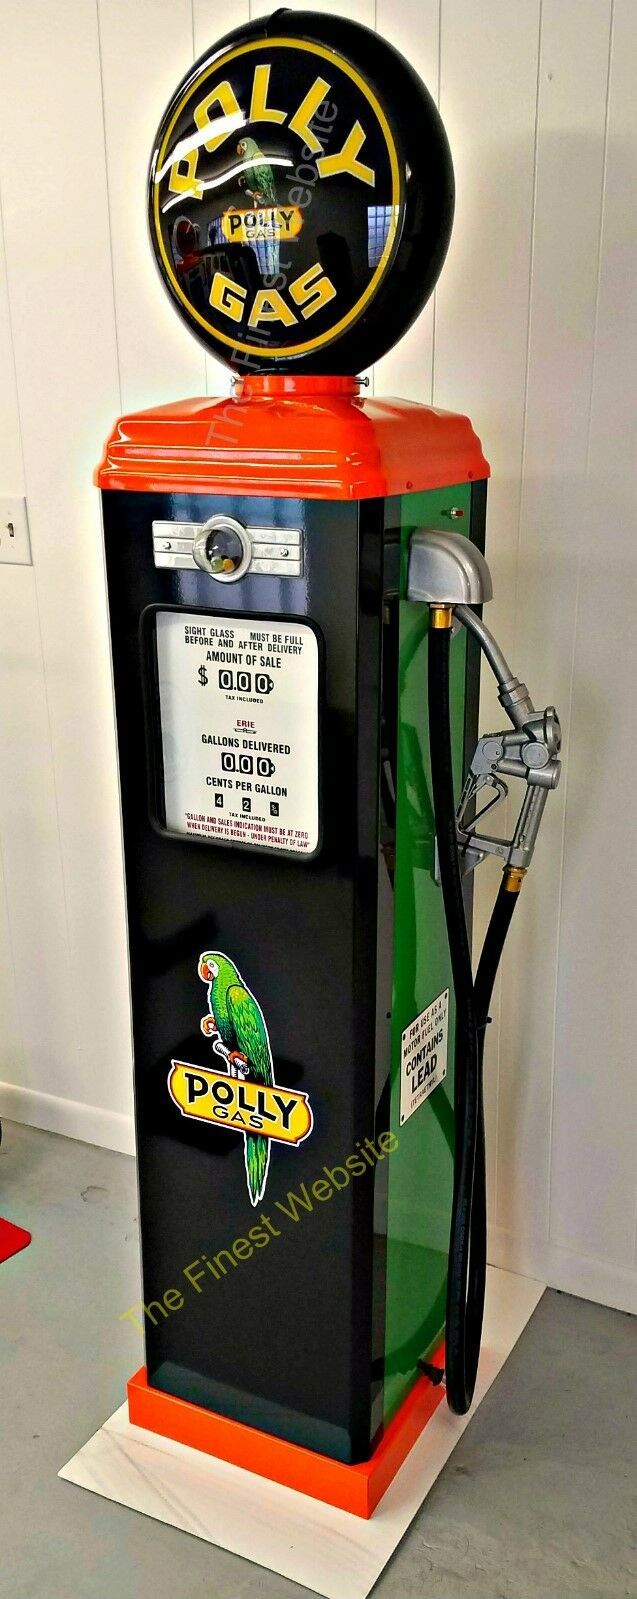 New Reproduction Polly Gas Pump Oil Antique Replica - Free Shipping*